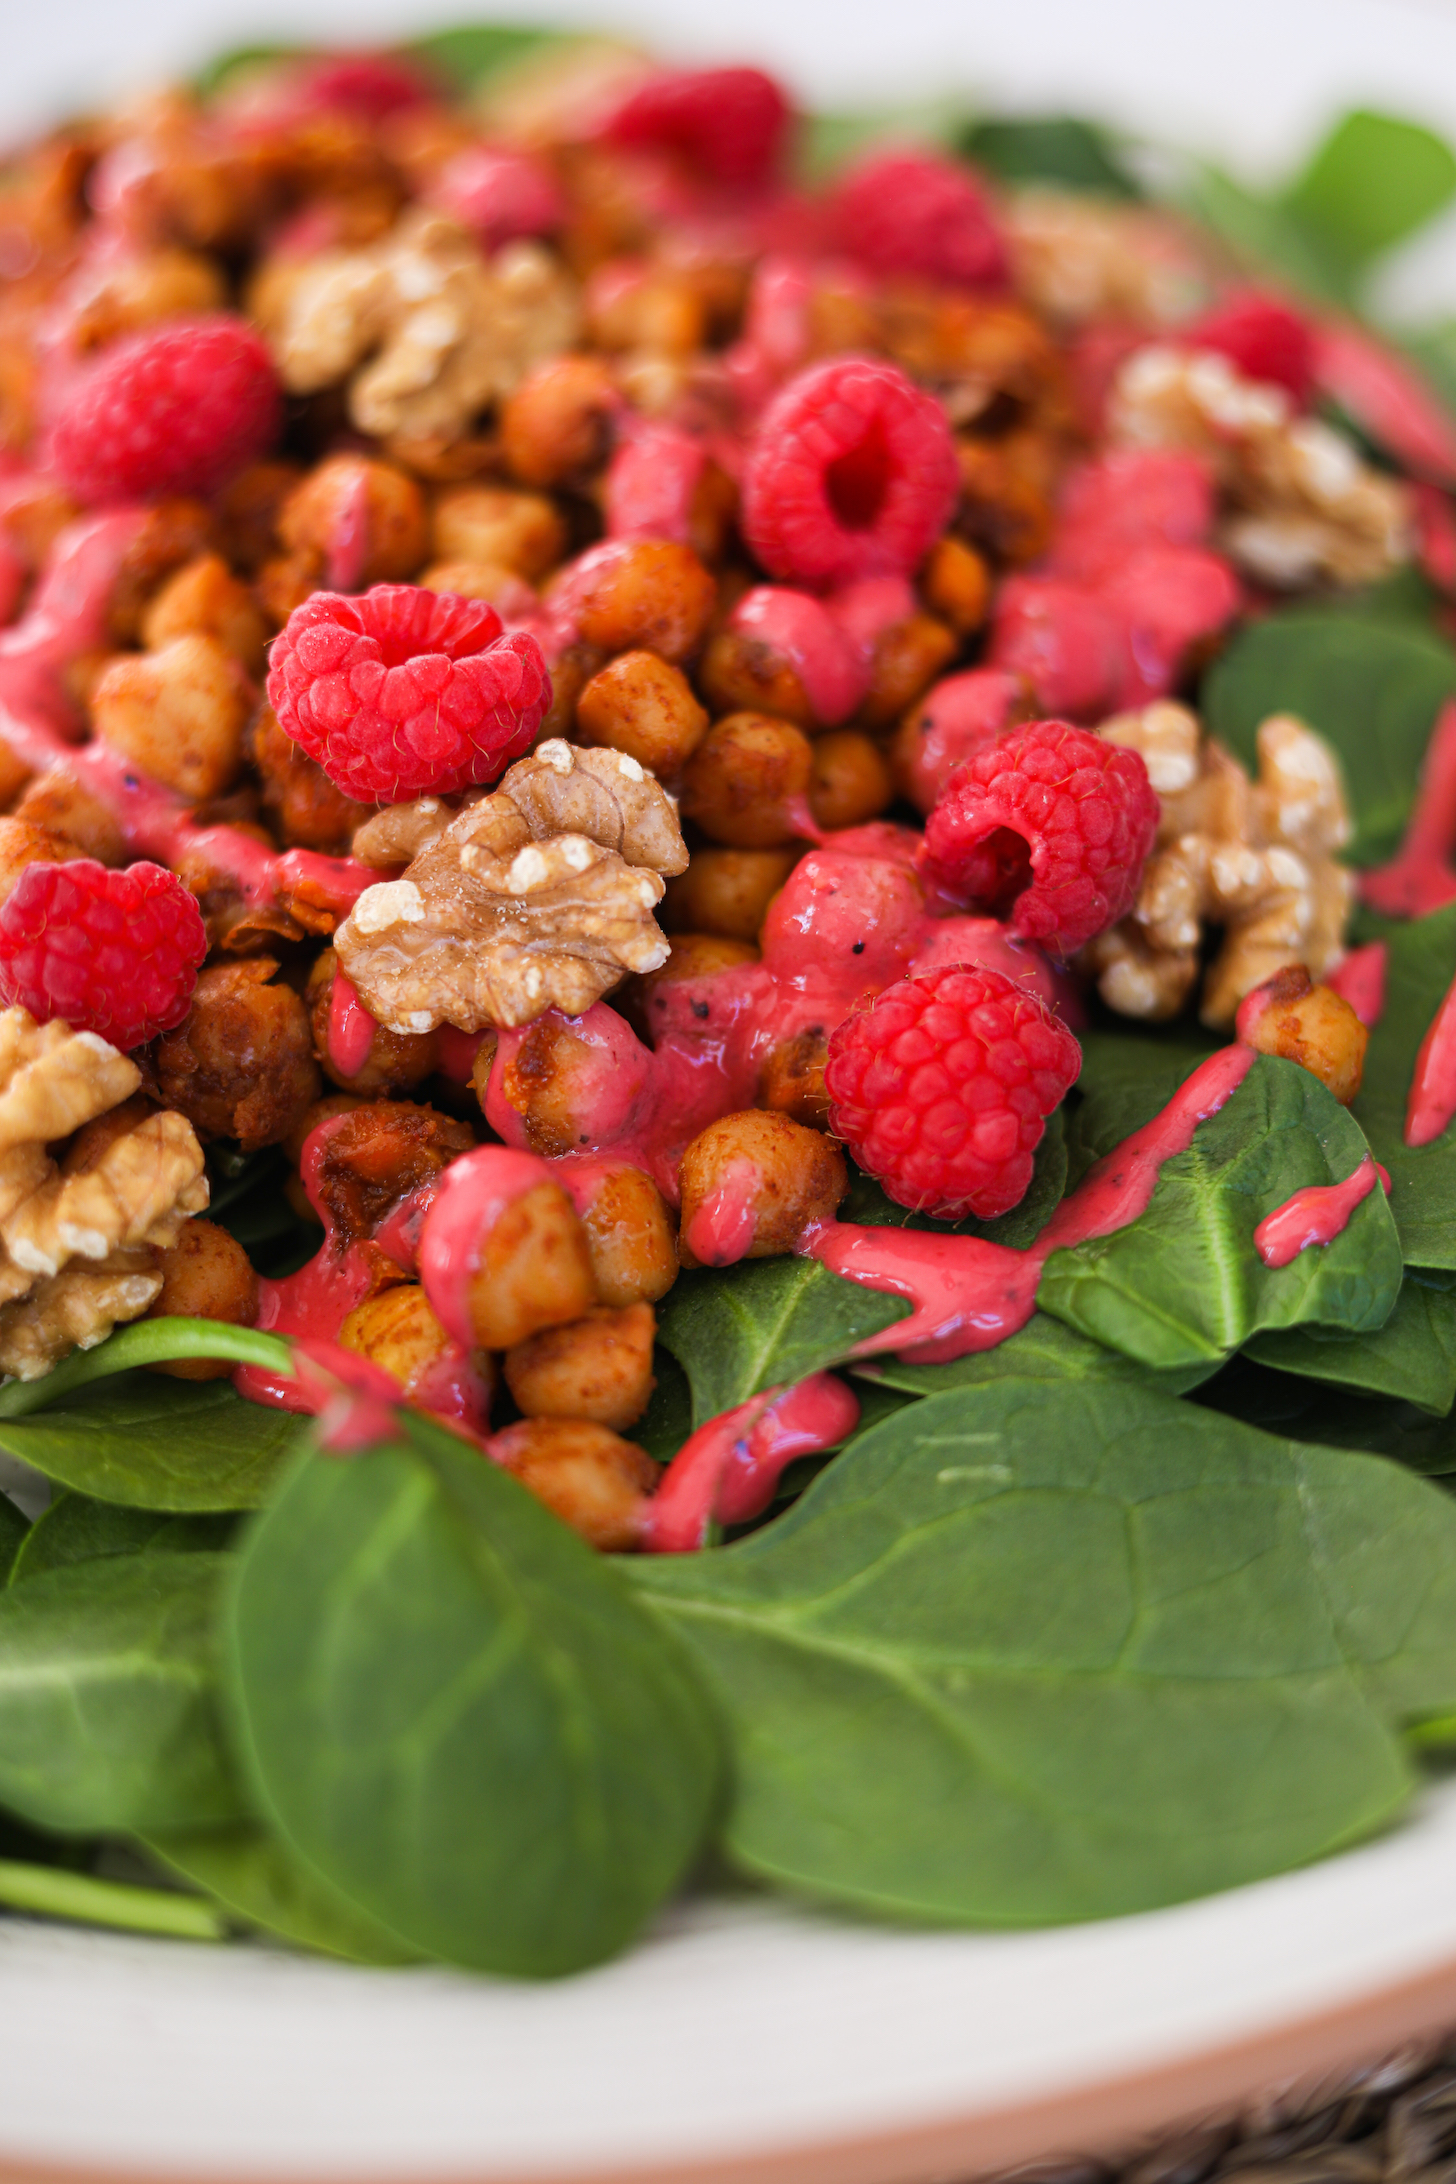 A close up image of chickpeas on a bed of spinach topped with raspberries, walnuts and a red dressing.